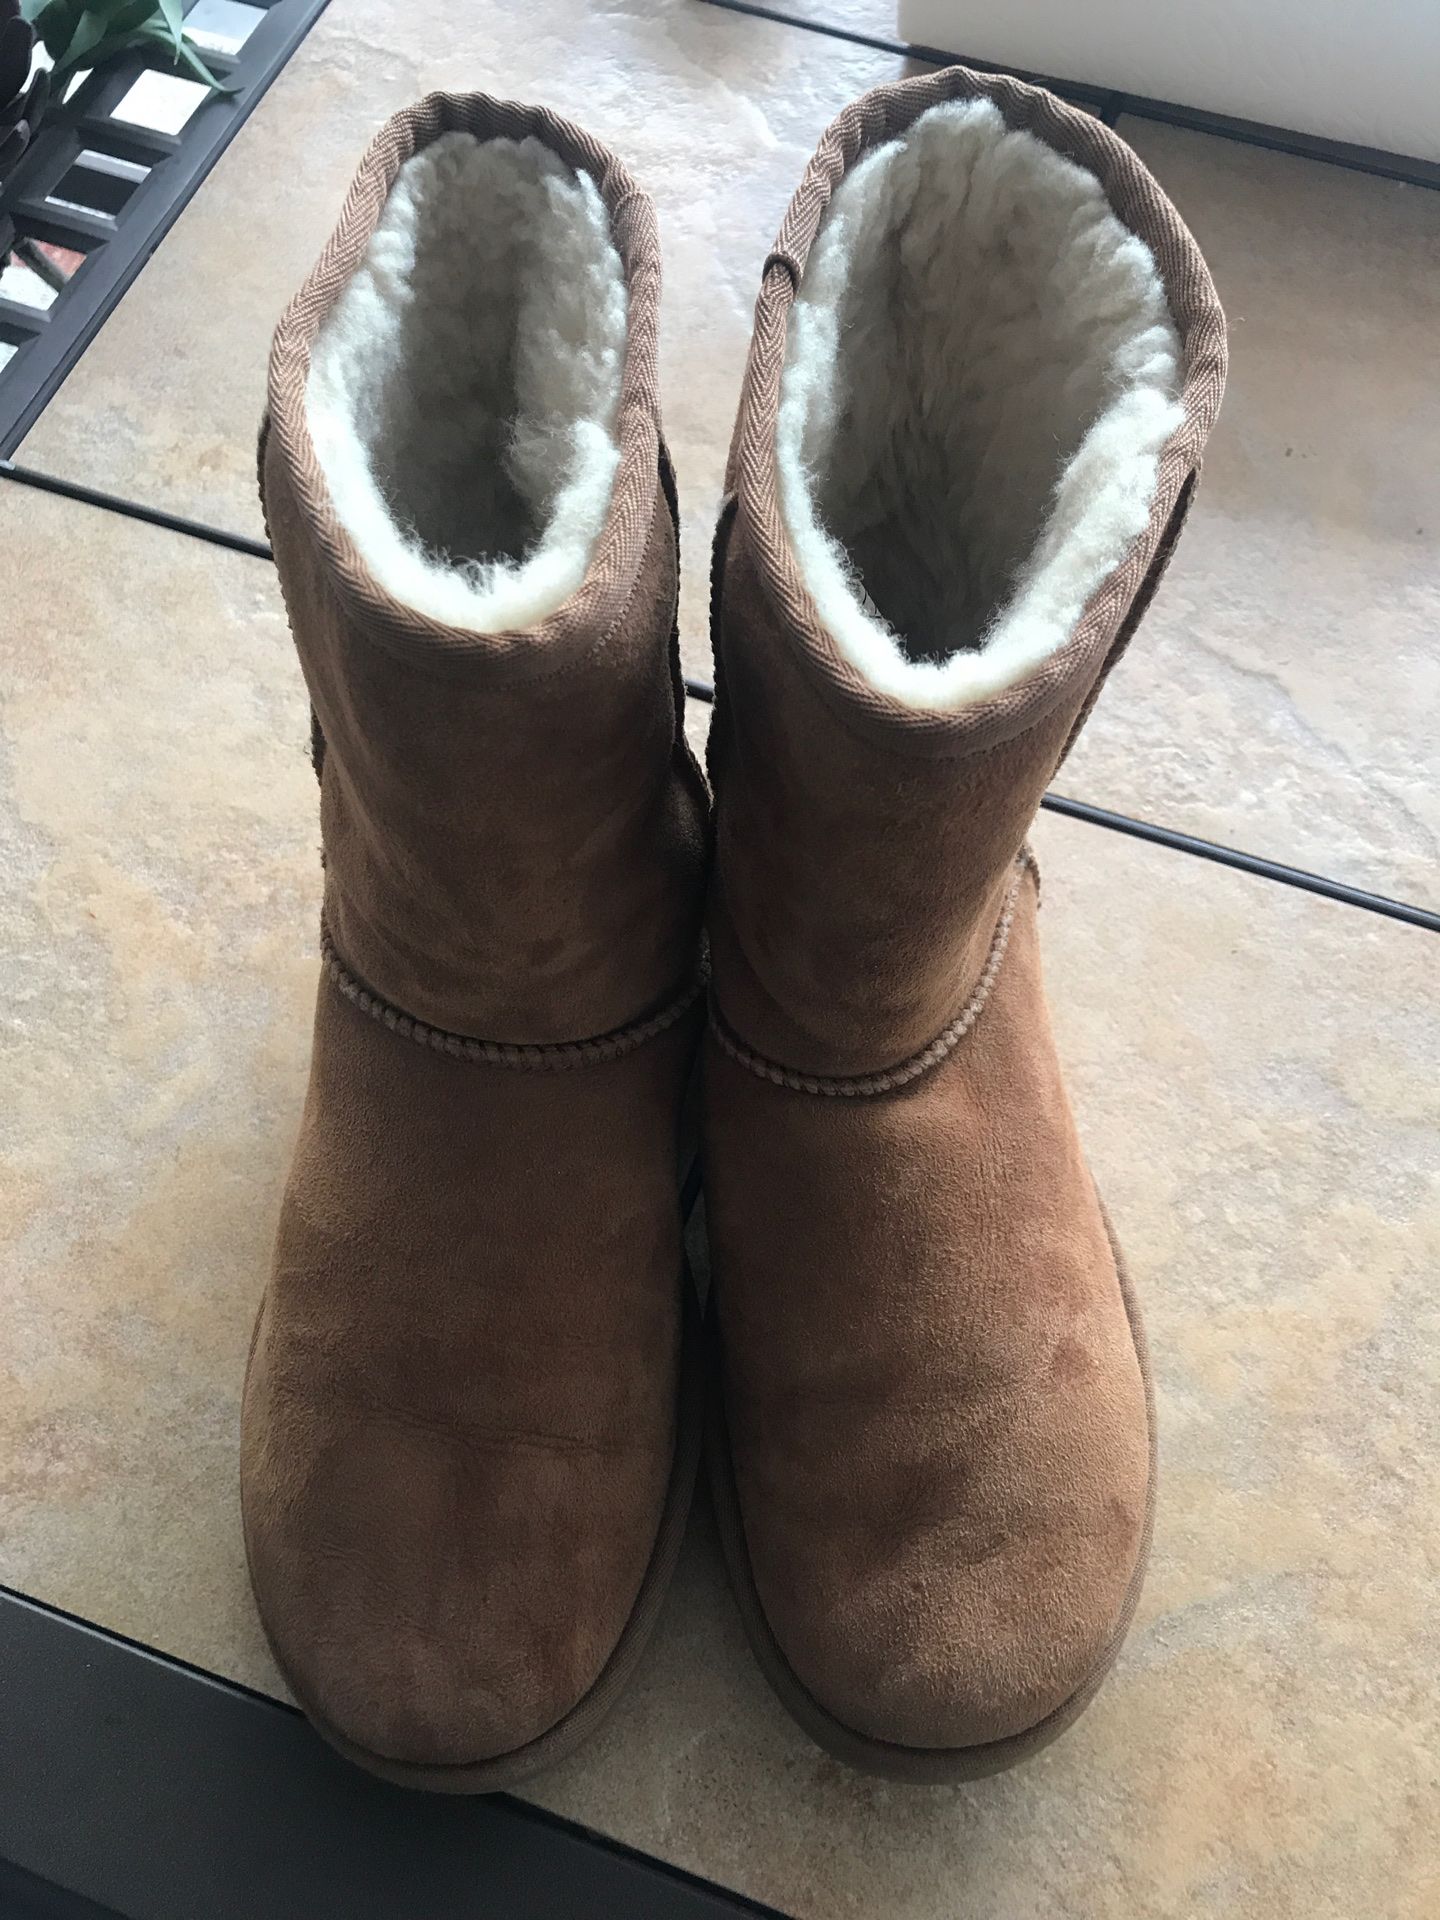 Ugg women’s boots size 8